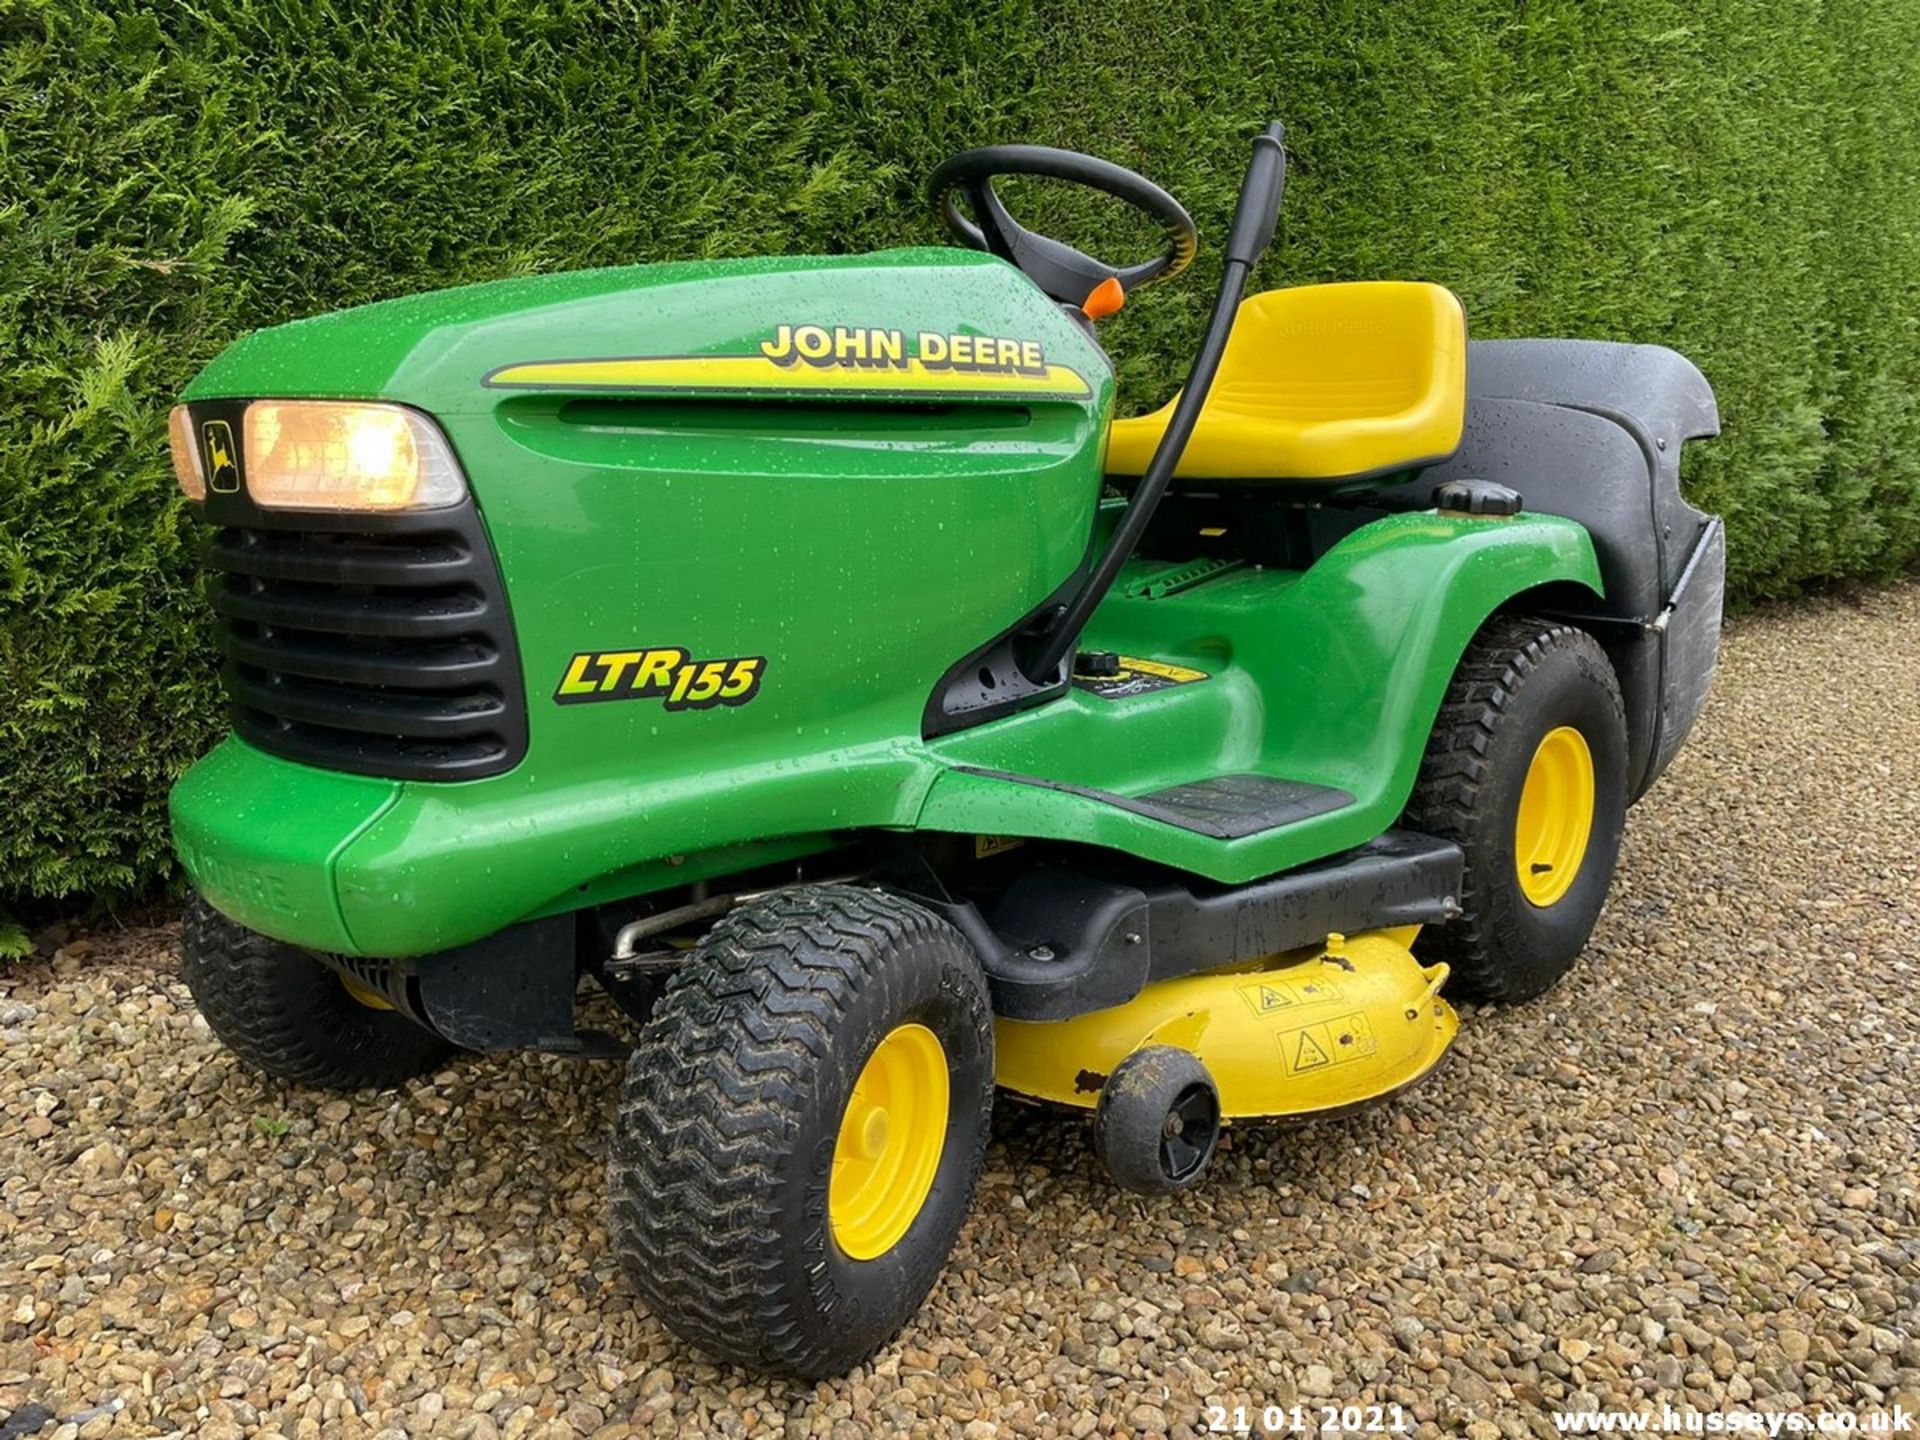 JOHN DEERE LTR155 RIDE ON MOWER C.W COLLECTOR - Image 7 of 11